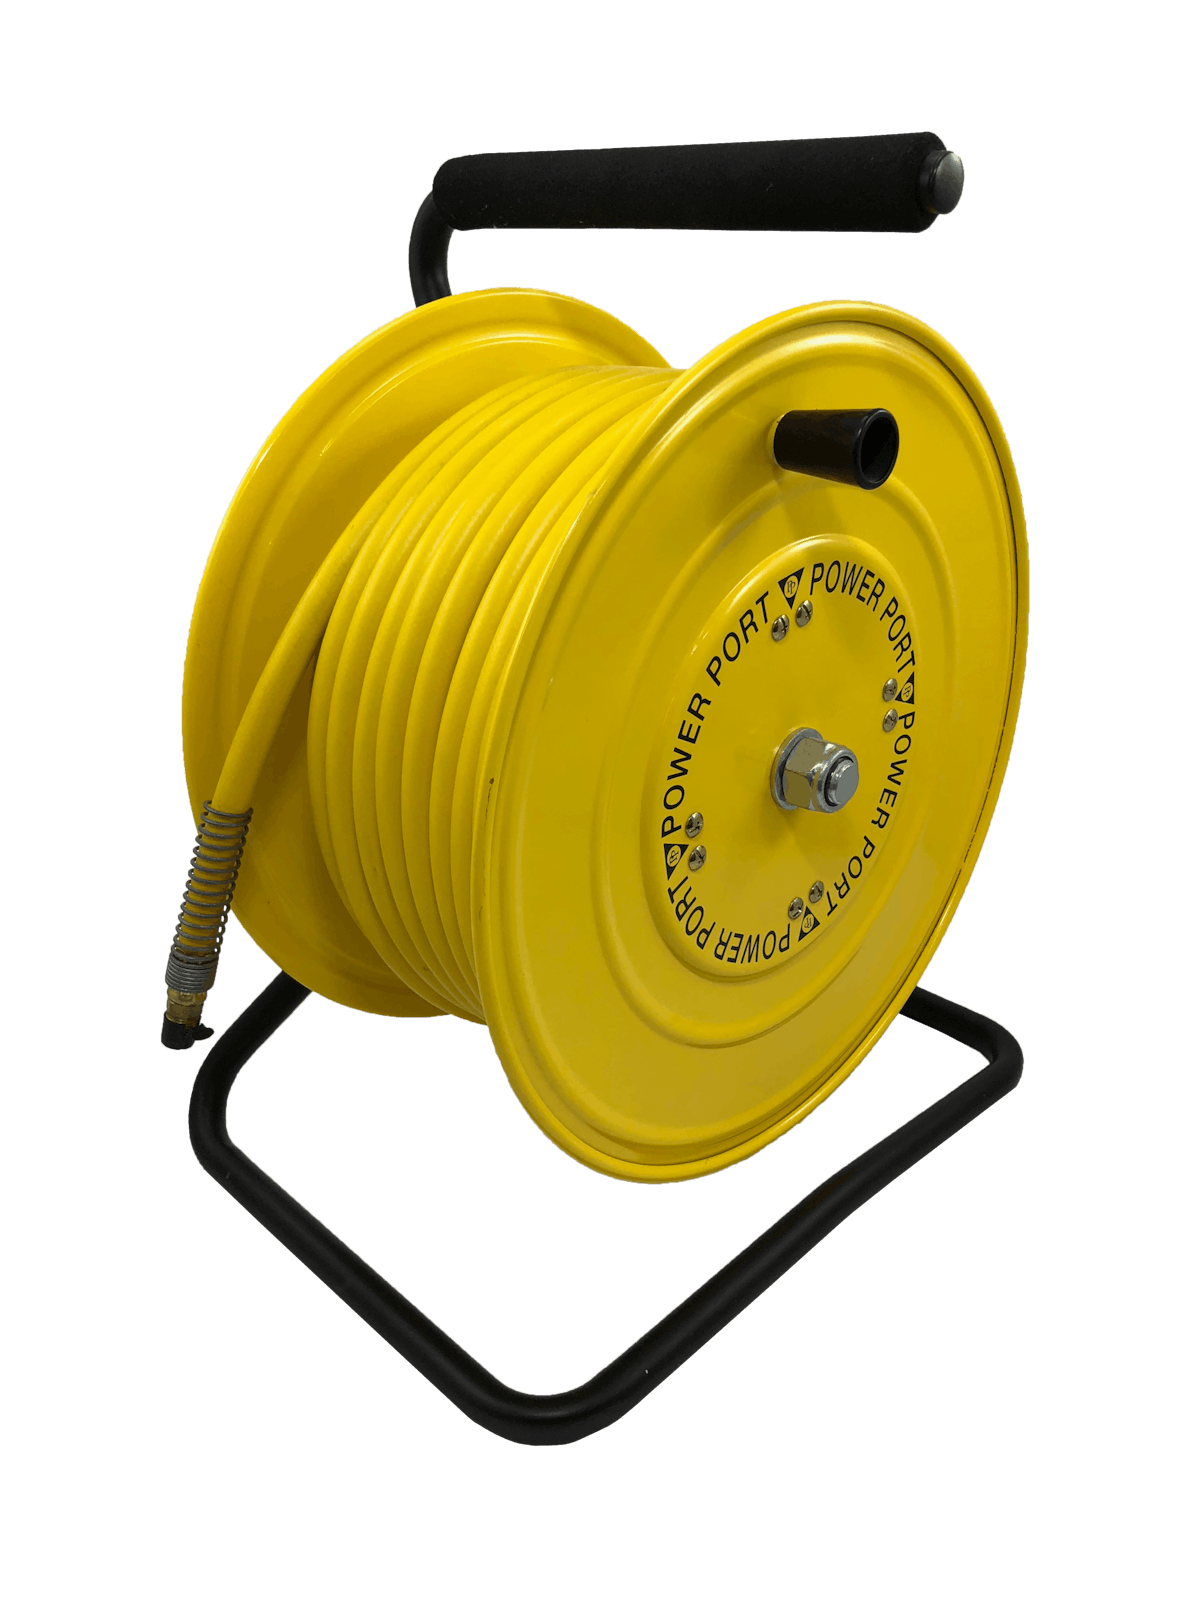 https://img.vehicleservicepros.com/files/base/cygnus/vspc/image/2019/05/Heavy_Duty_Steel_Hose_Reel__Power_Port_Products_.5cdb1a725d070.png?auto=format,compress&fit=max&q=45&w=1200